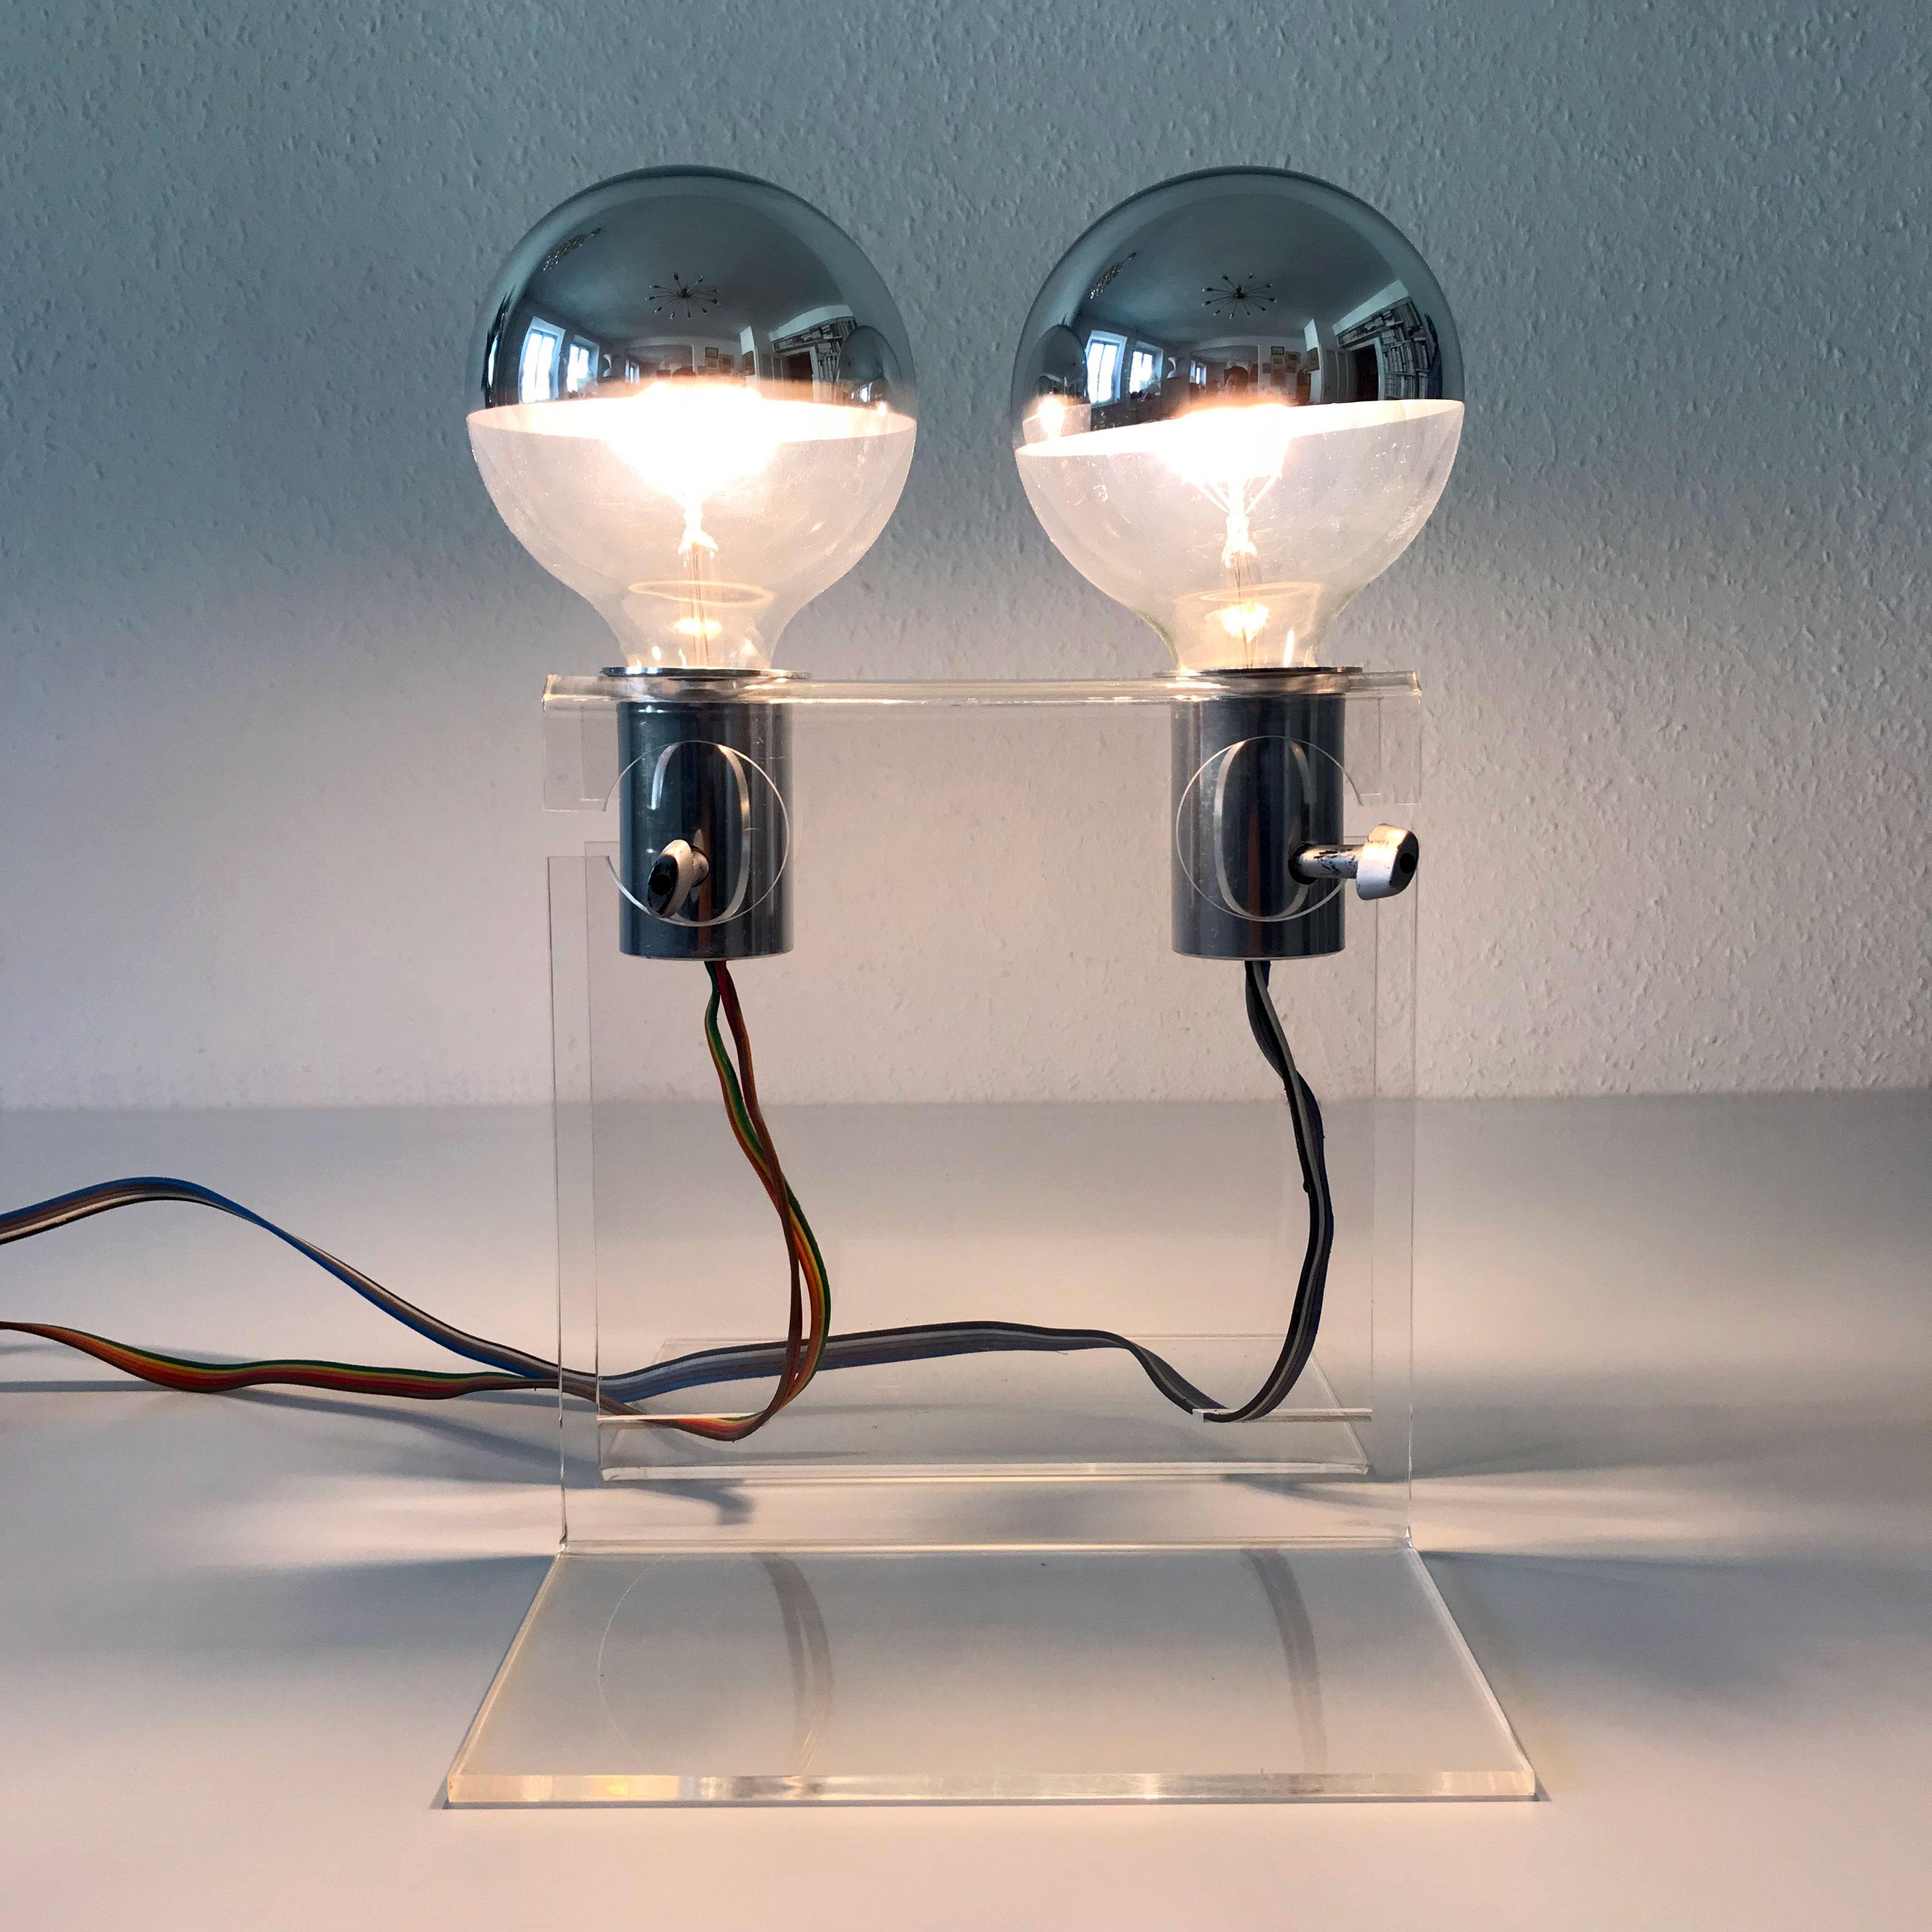 Unique Mid-Century Modern table lamp. Designed and manufactured probably in 1970s, Germany.

The base is executed in clear plexiglass. The lamp has 2 x E27 screw fit bulb holders. Better run with big globe bulbs. It is wired, in working condition